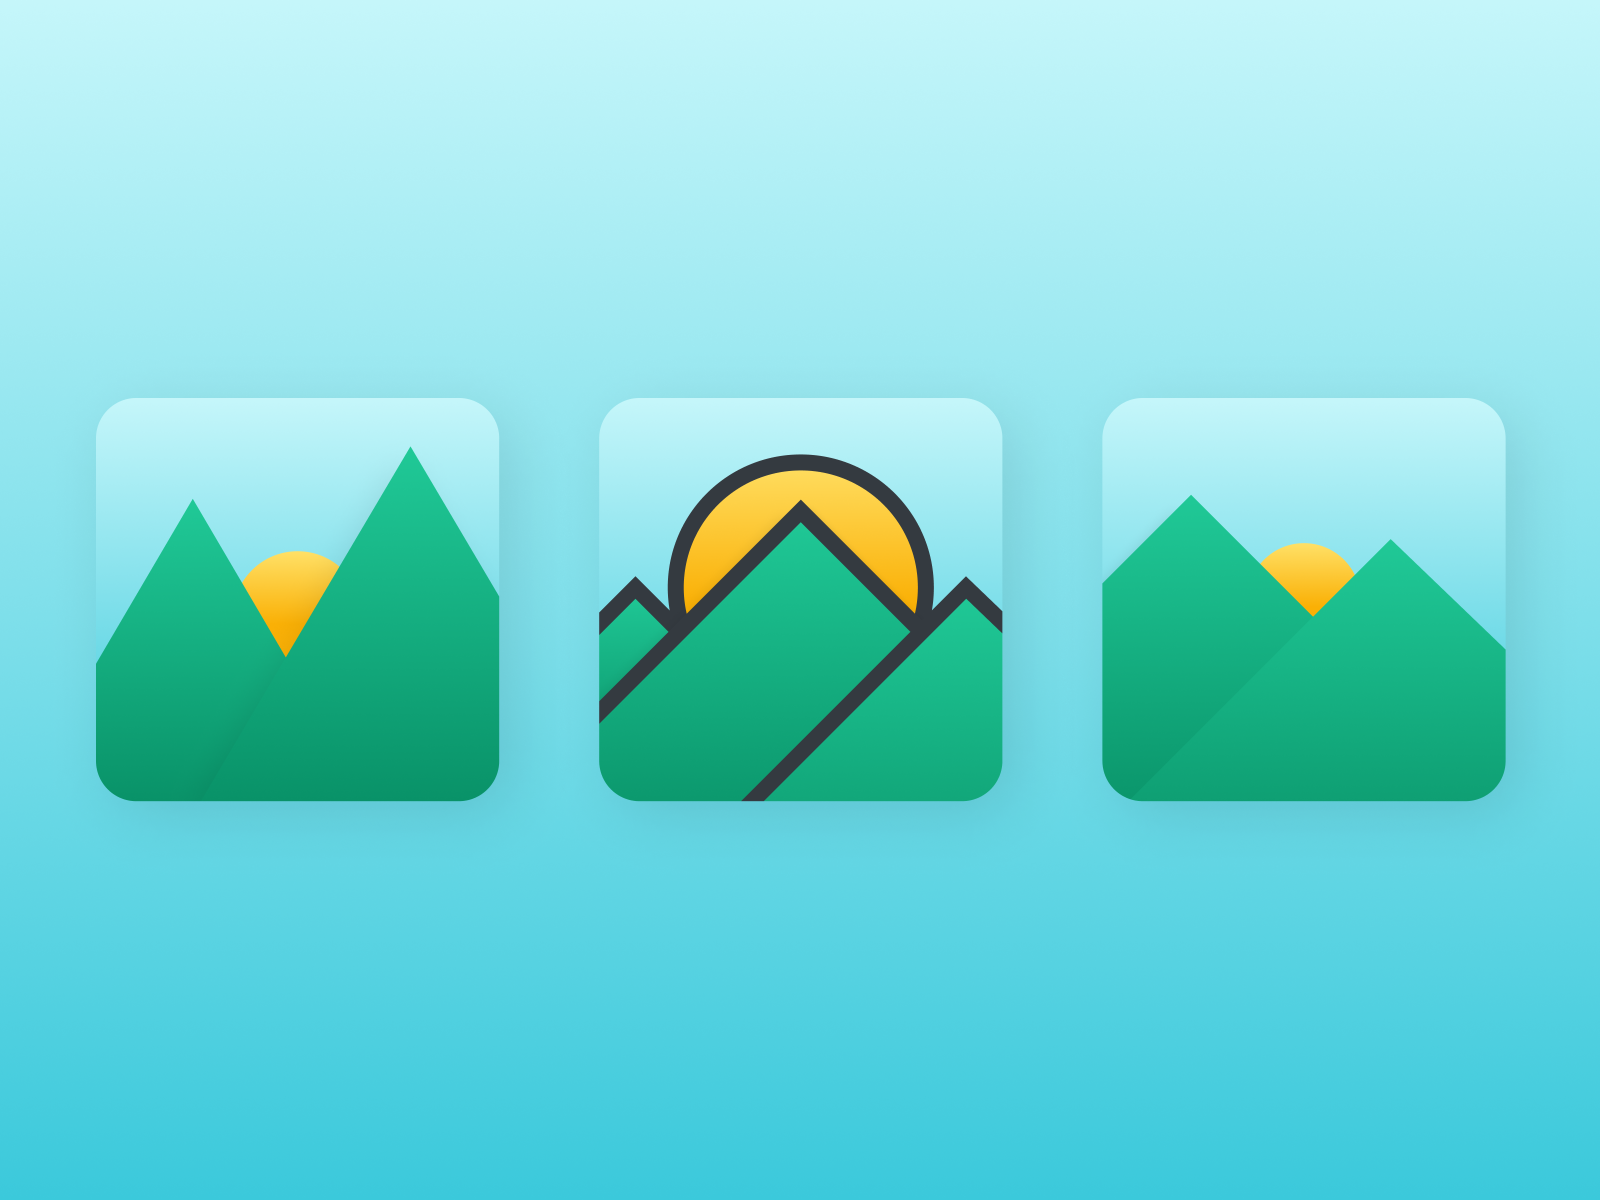 Mount Icon for Photo Gallery by Akmal Farhan on Dribbble